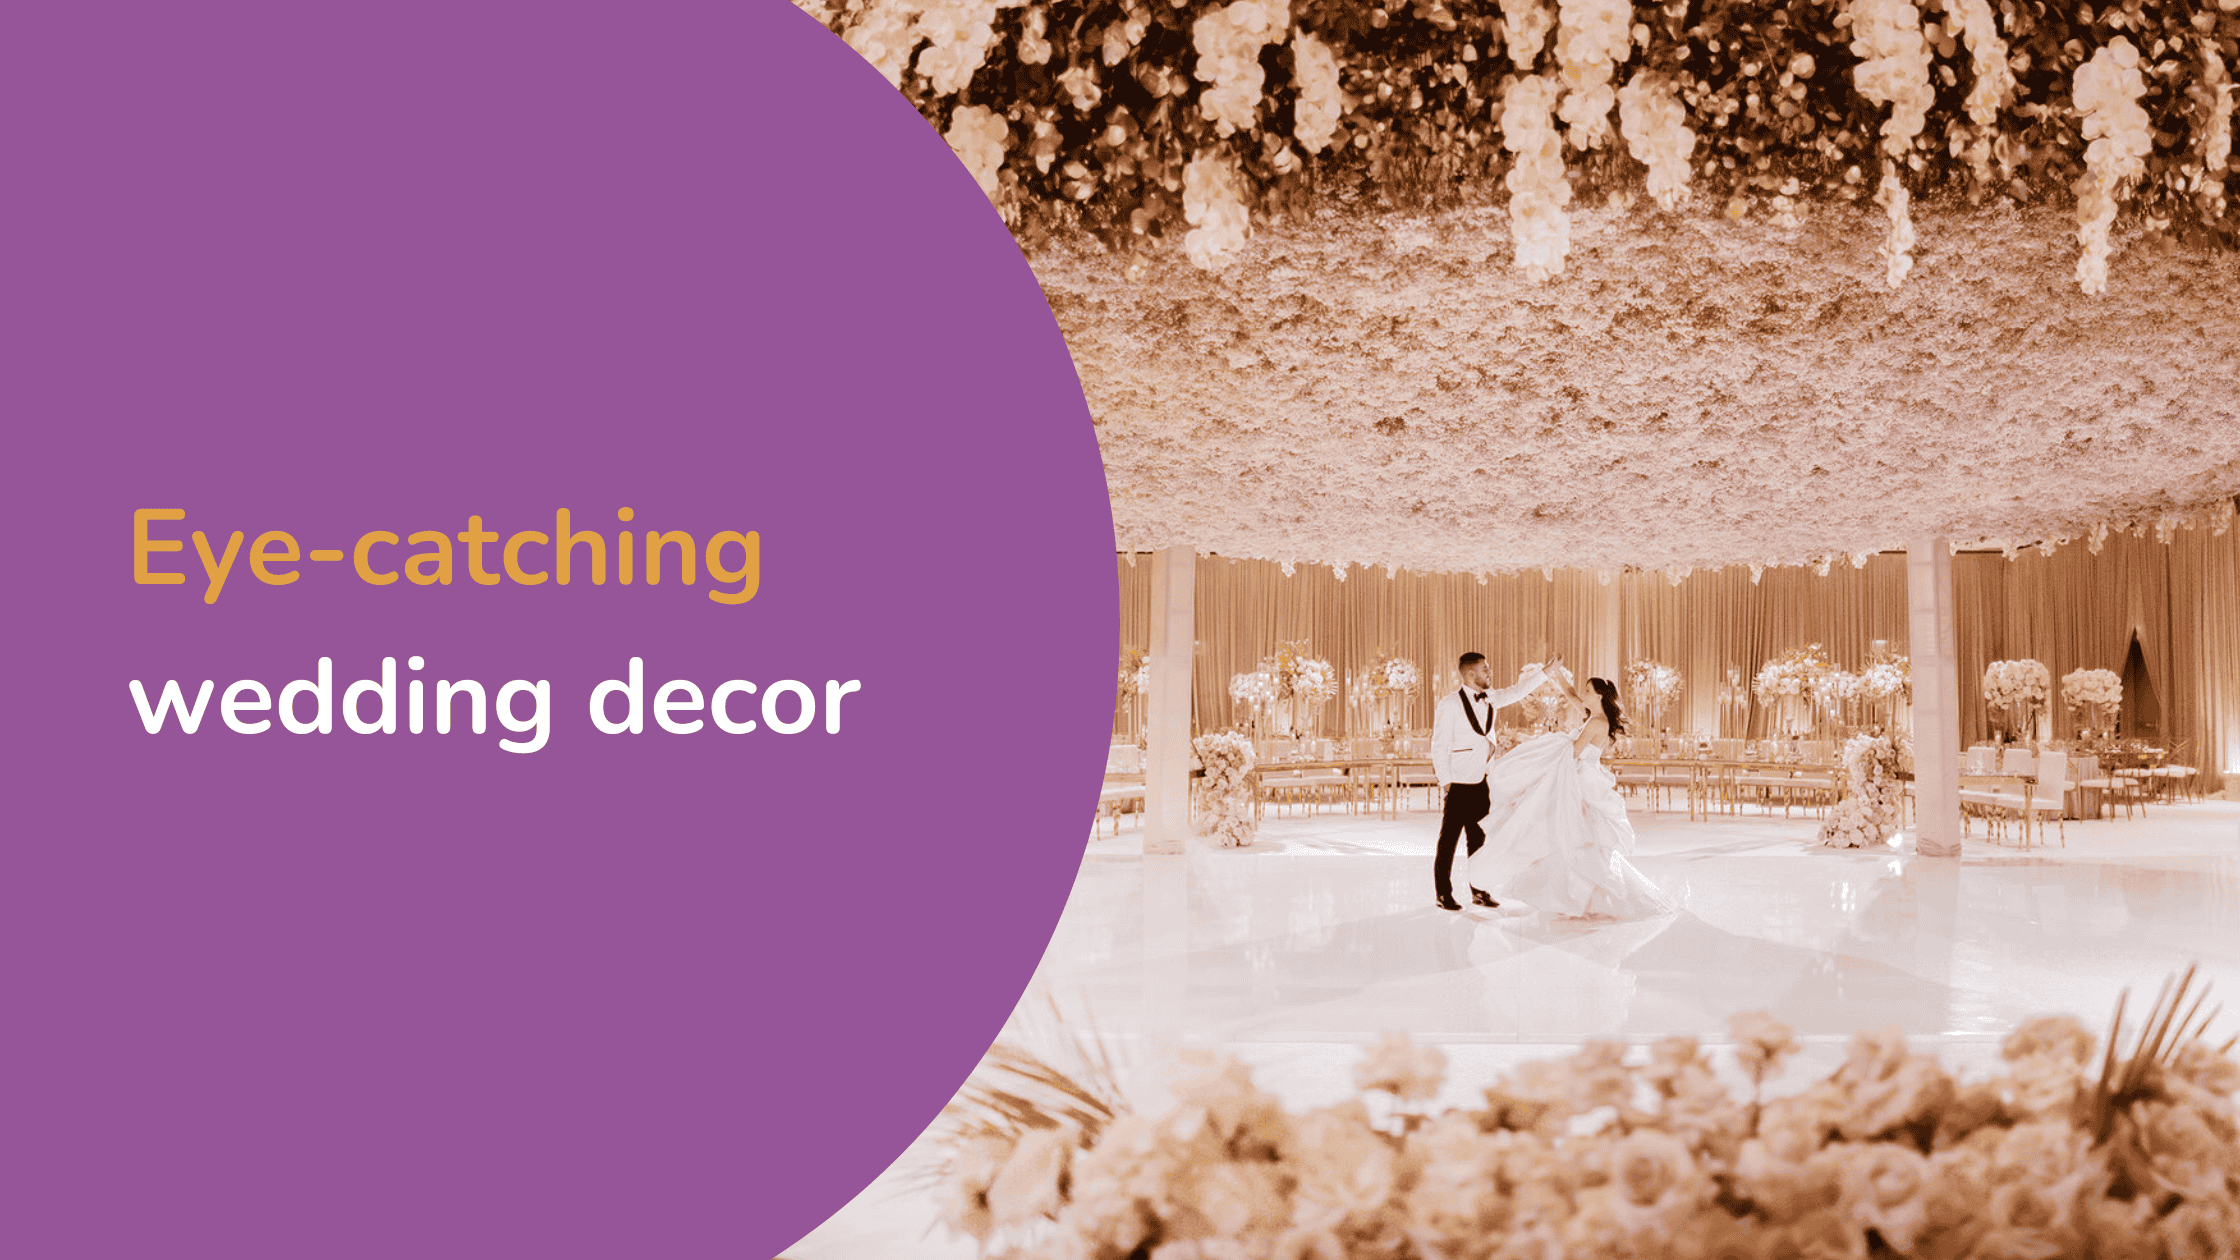 Header image of a newly wed couple having their first dance surrounded by flowers with the overlay 'eye-catching wedding decor'